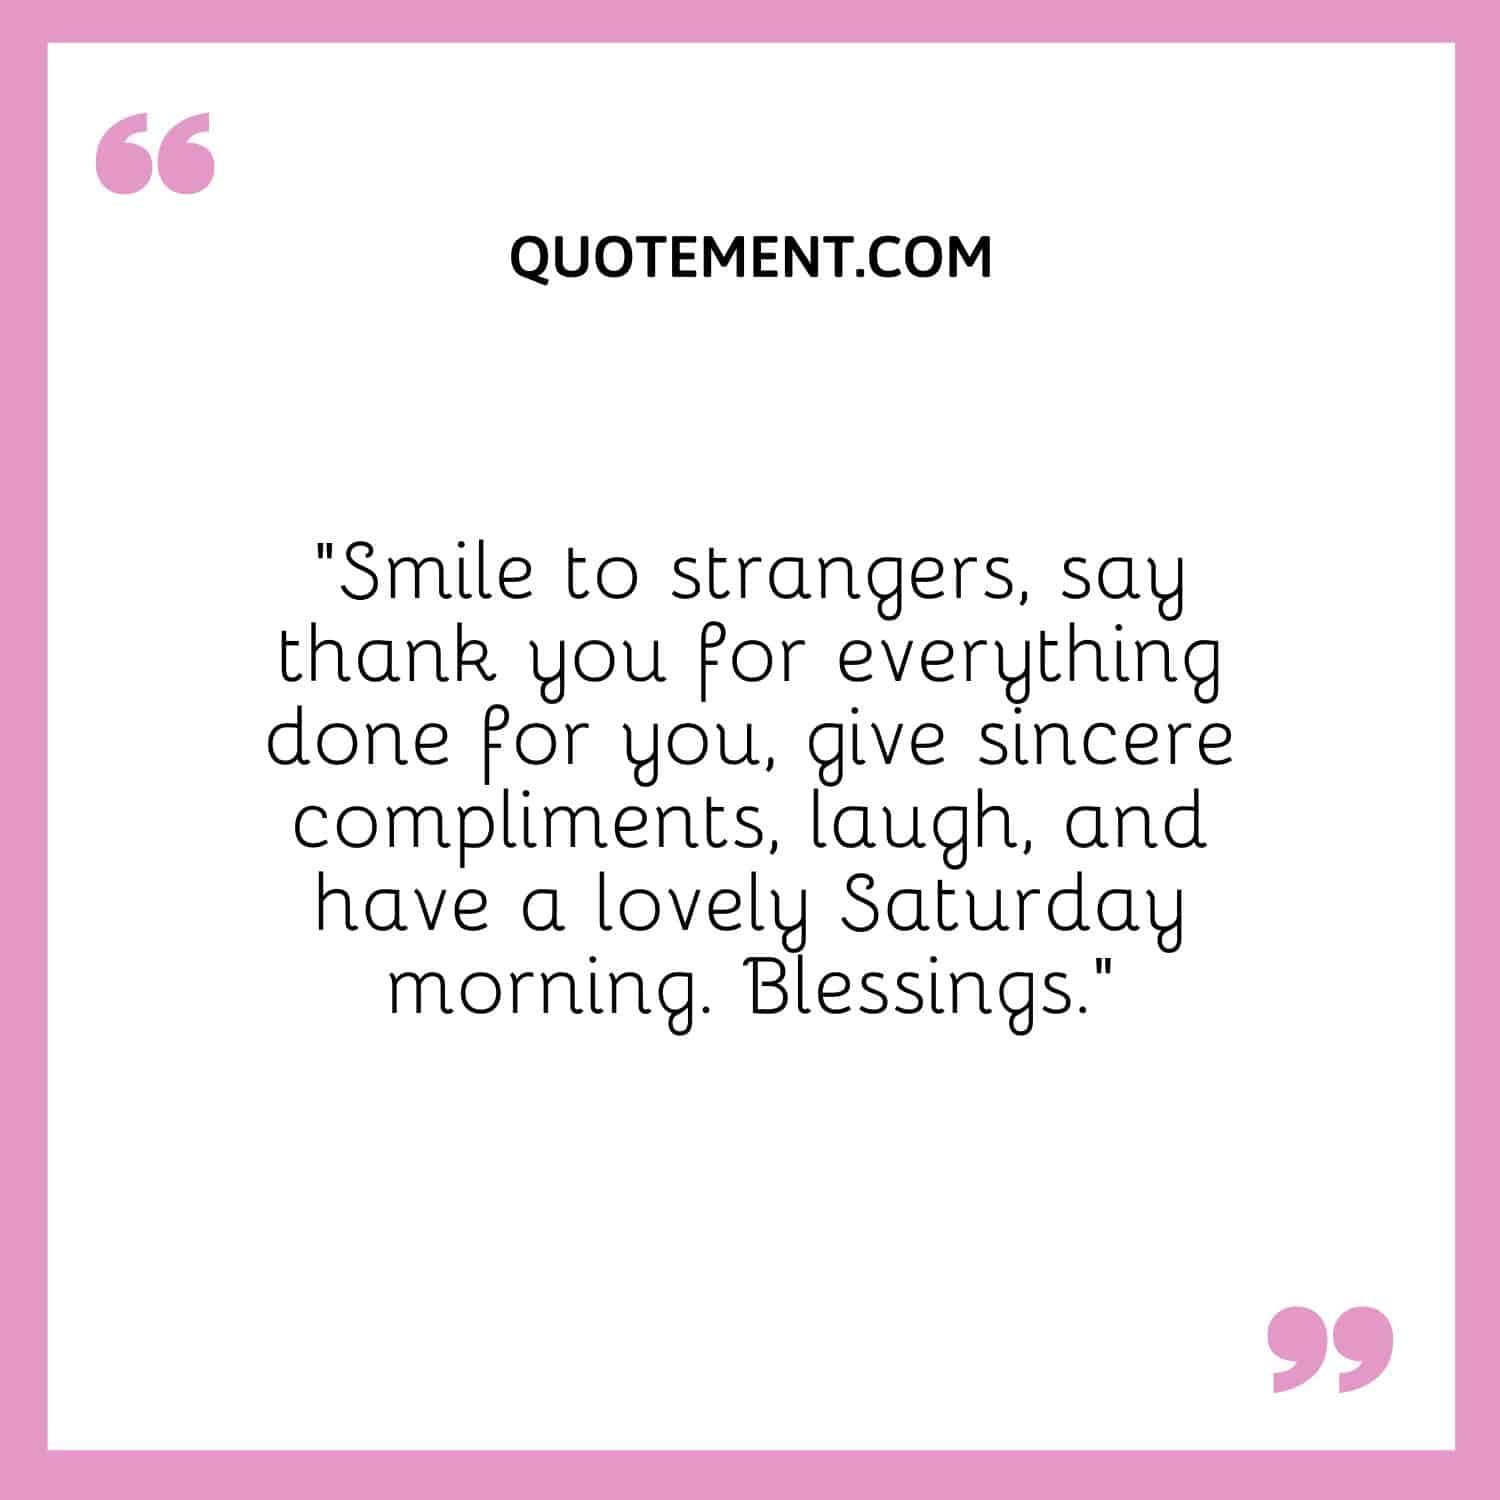 “Smile to strangers, say thank you for everything done for you, give sincere compliments, laugh, and have a lovely Saturday morning. Blessings.”